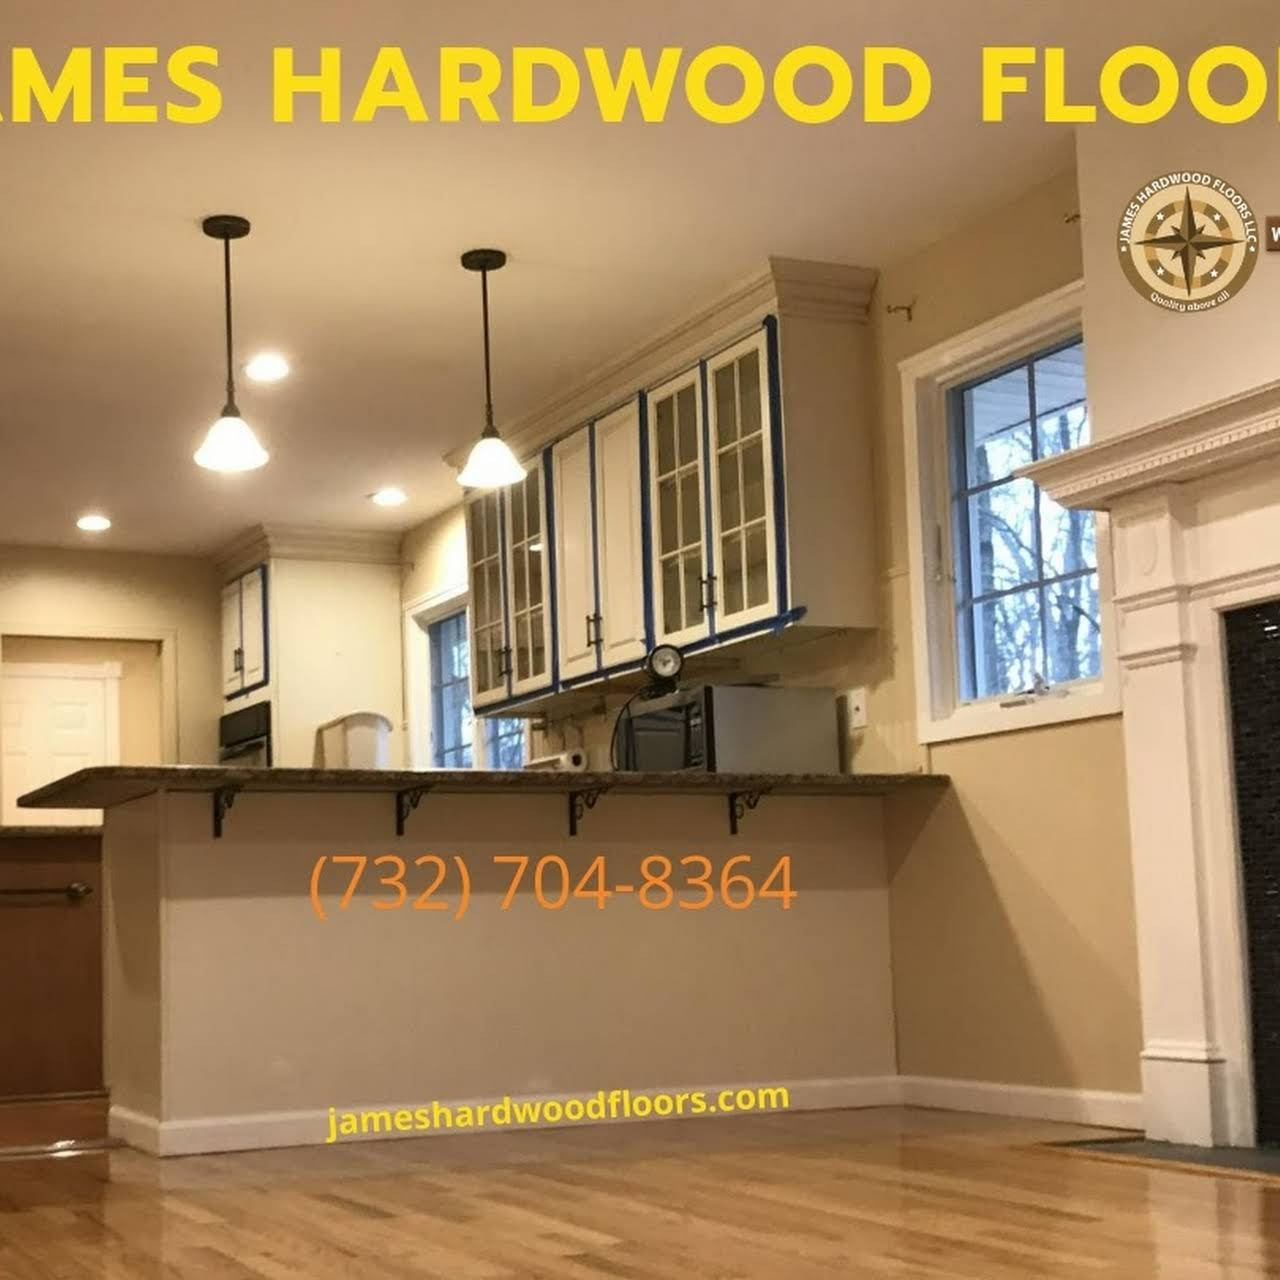 12 Recommended Hardwood Flooring Contractors Nj 2024 free download hardwood flooring contractors nj of james hardwood floorsa llc local contractor no retail price again within are you looking f